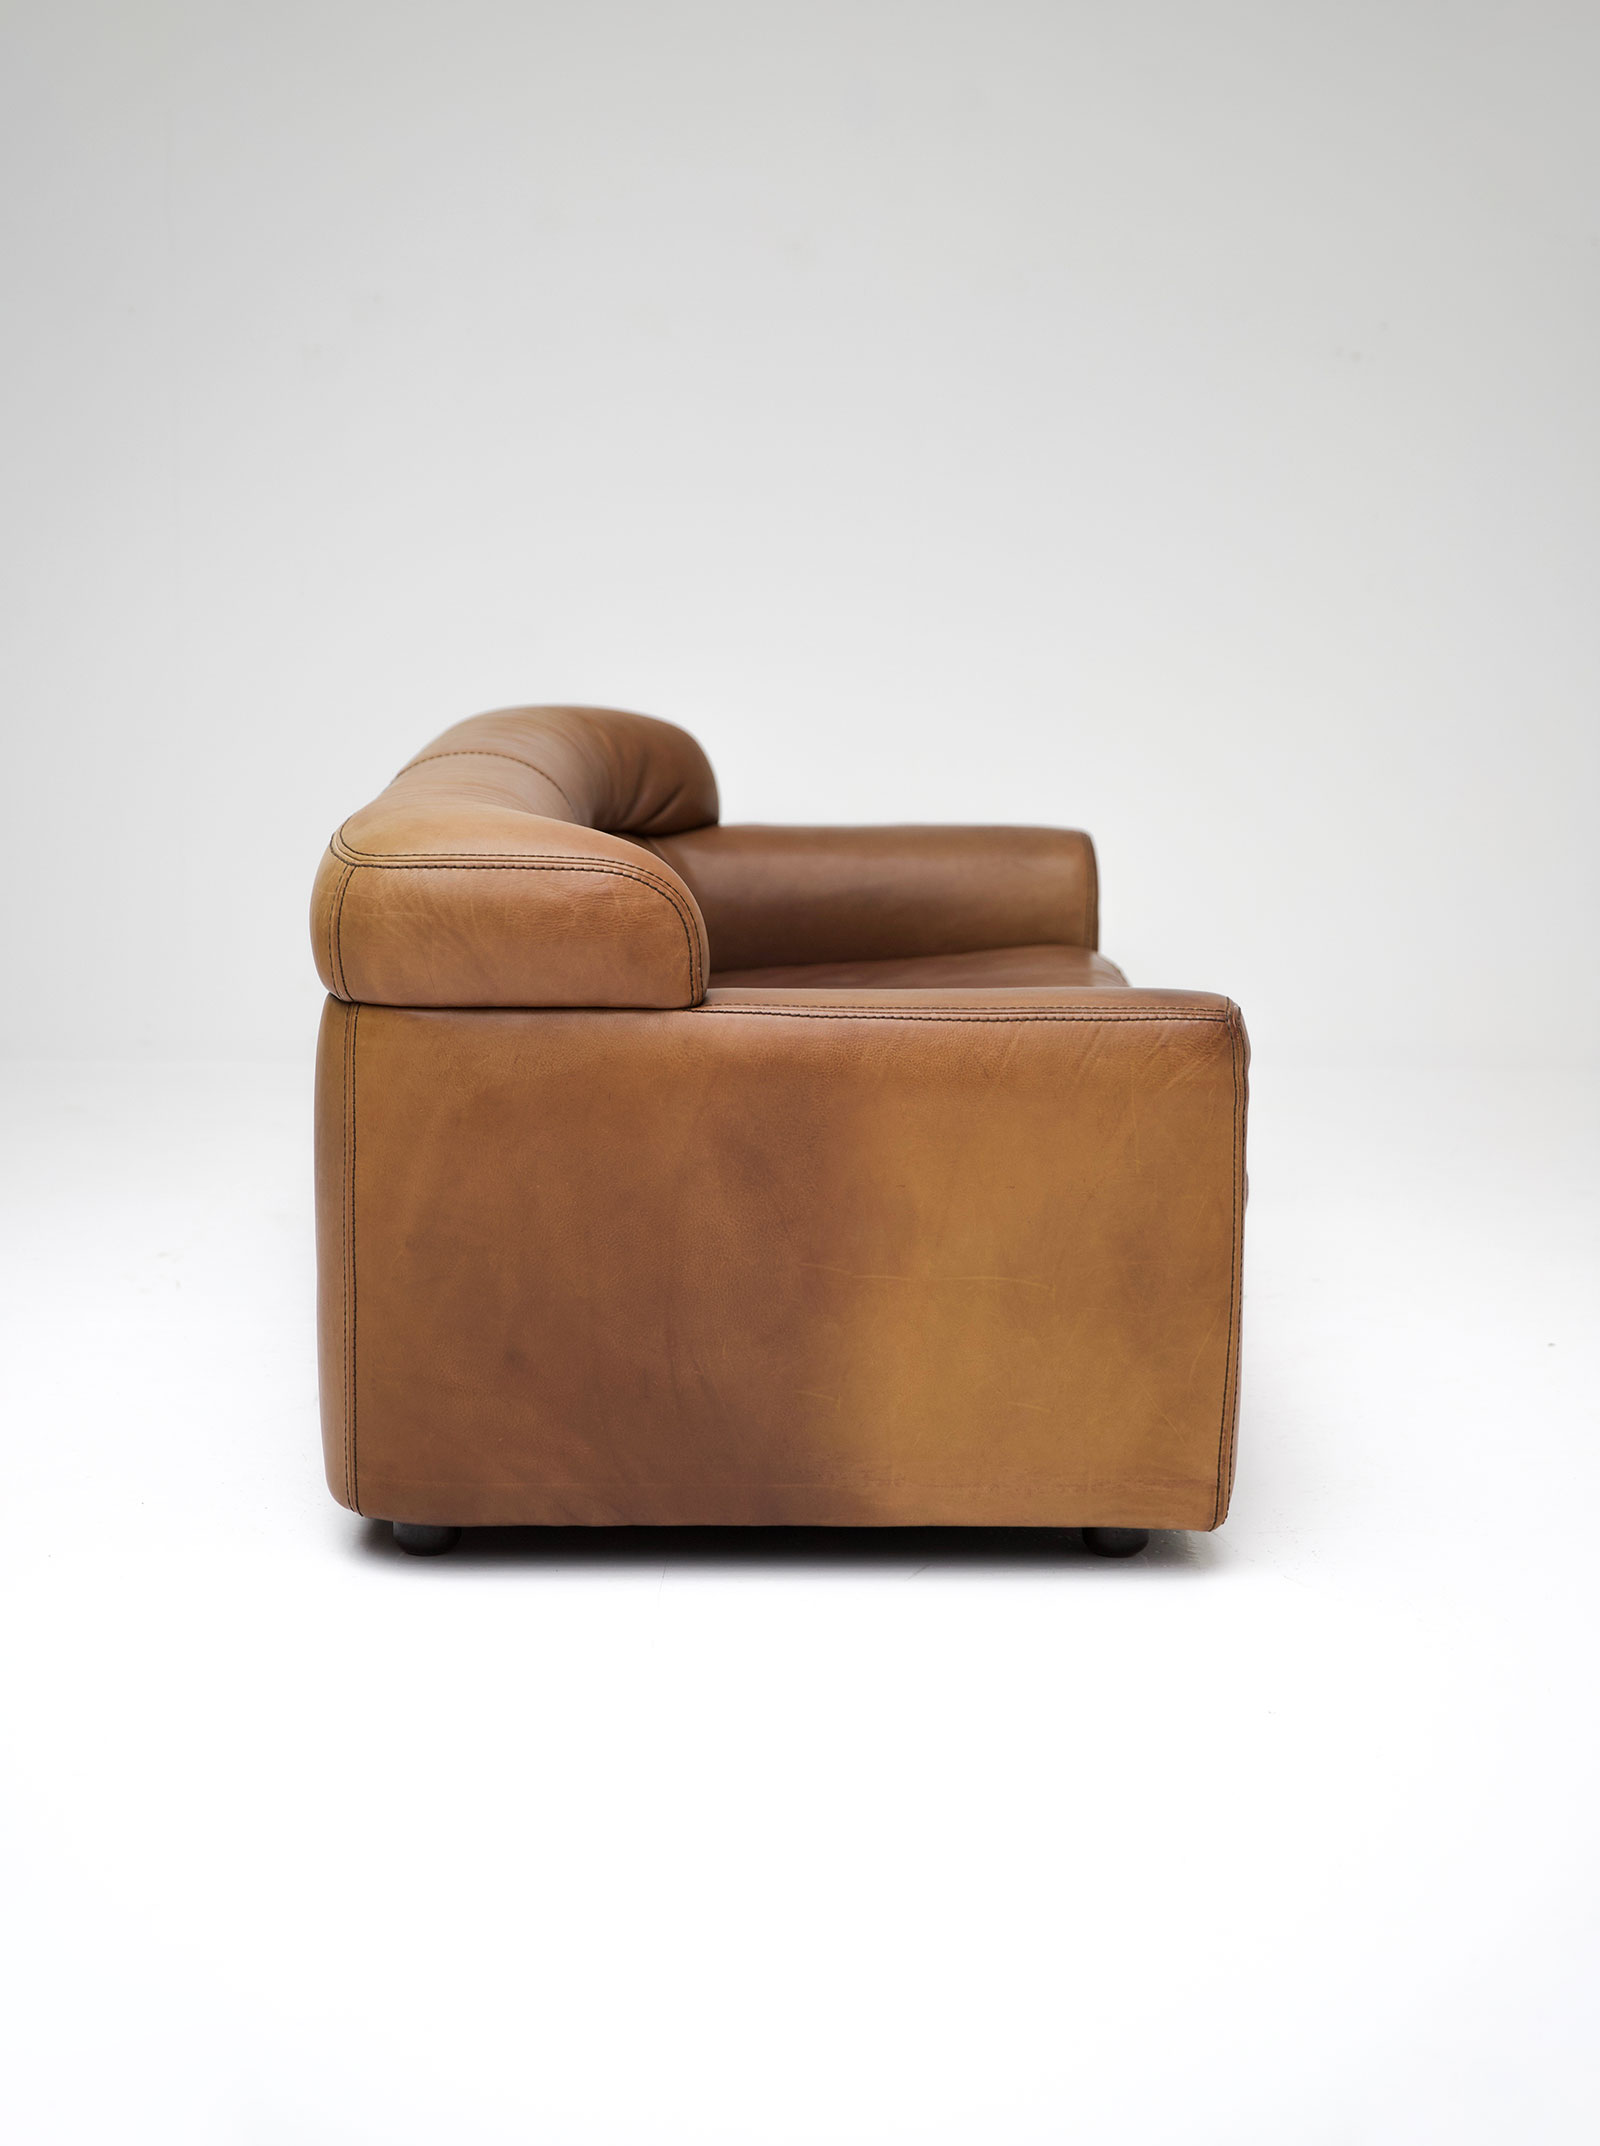 durlet leather two seat sofaimage 3